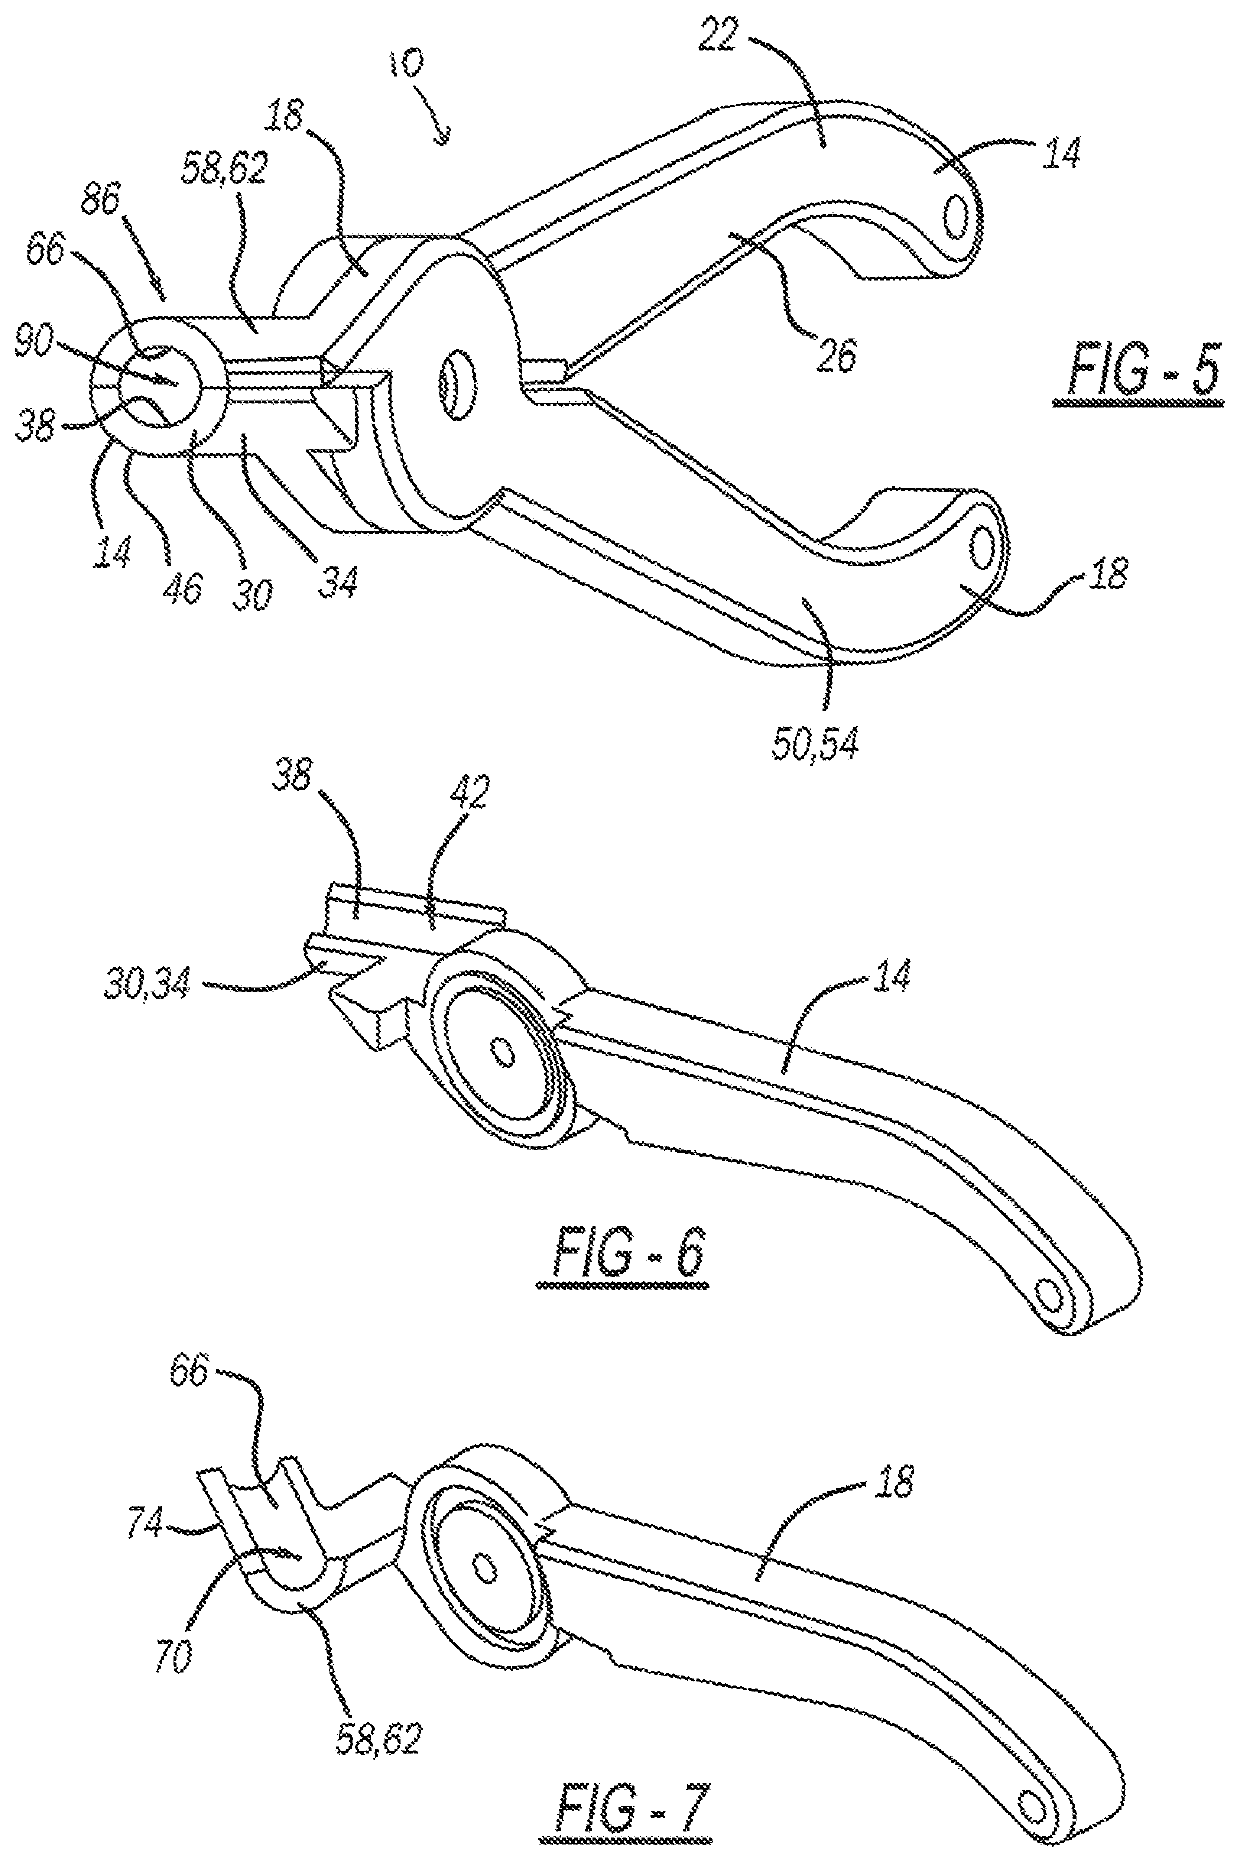 Bolt loader pliers and method of use thereof